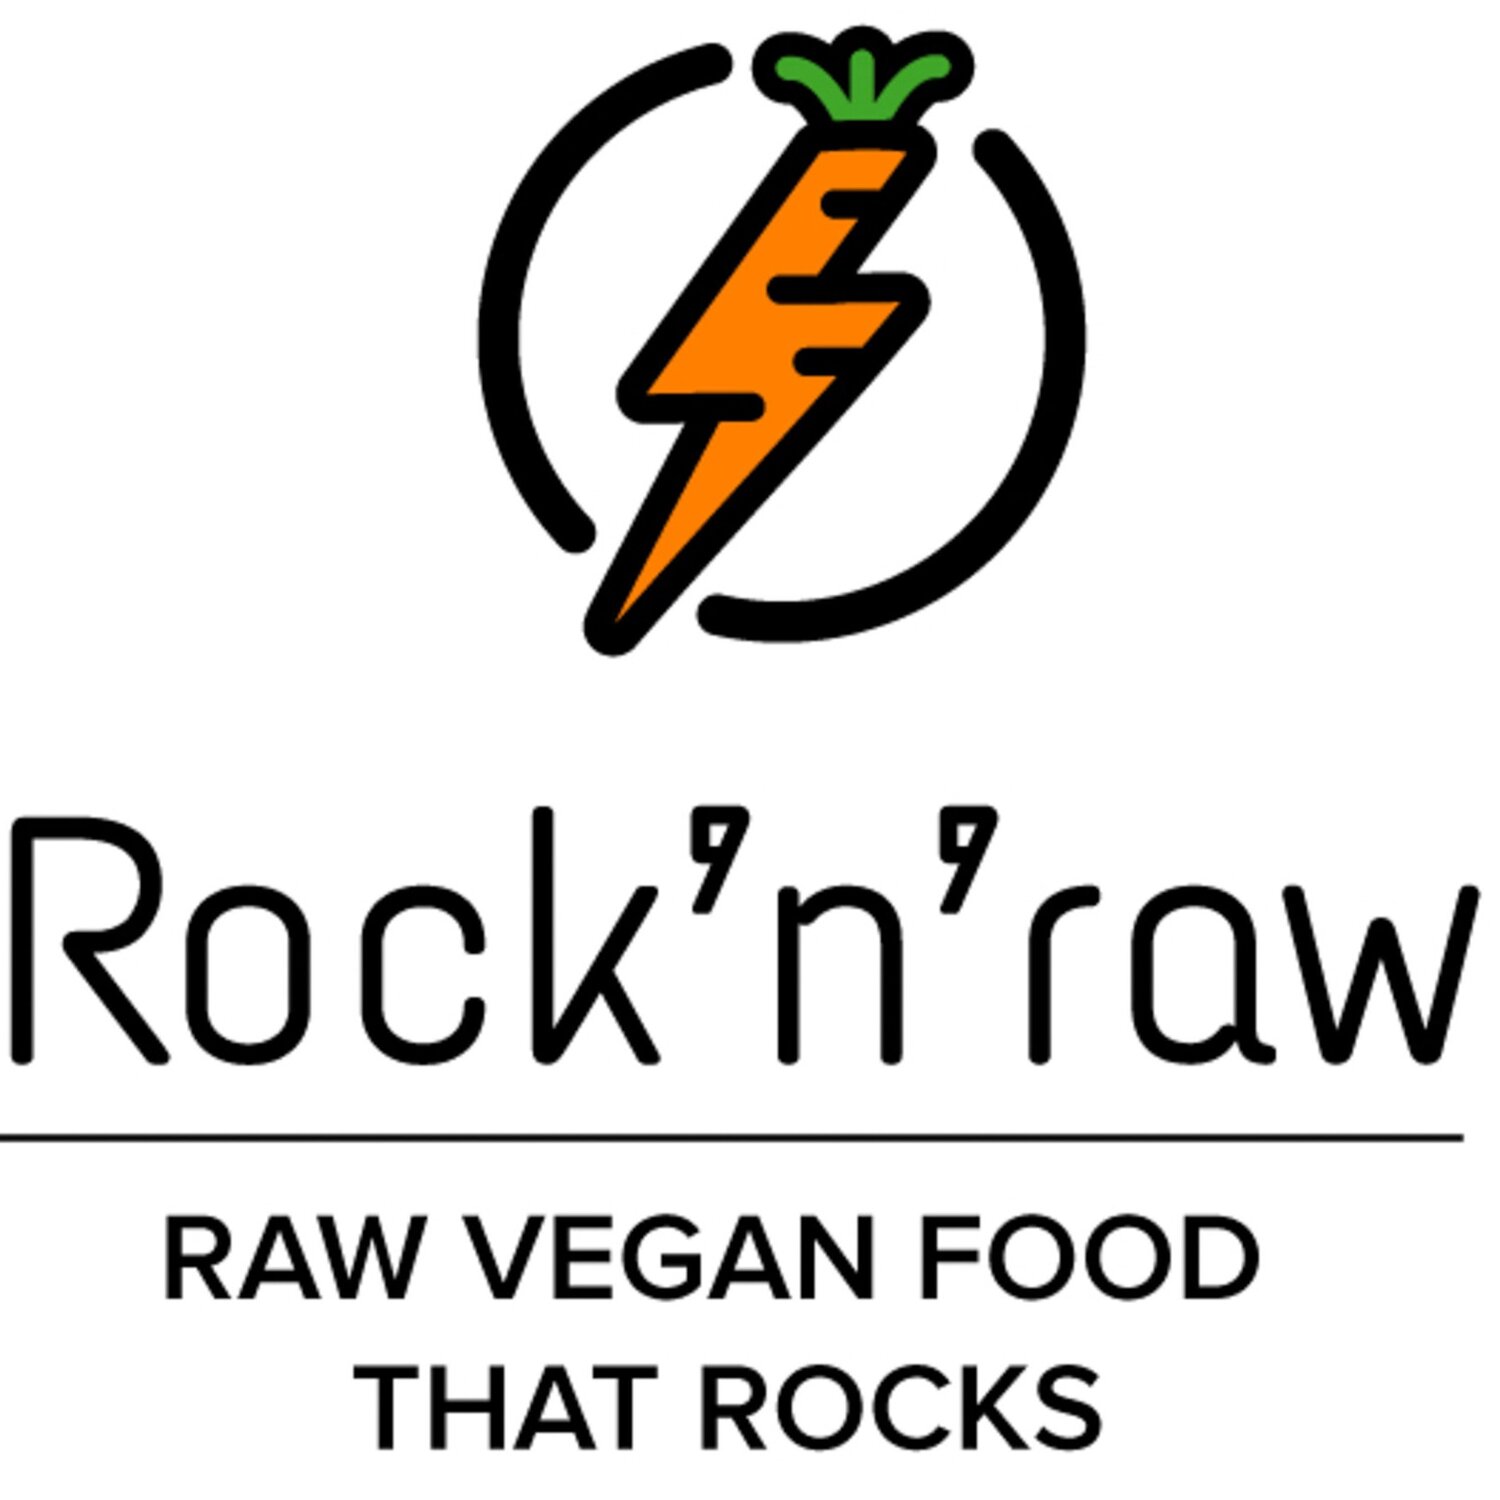 Rock and Raw